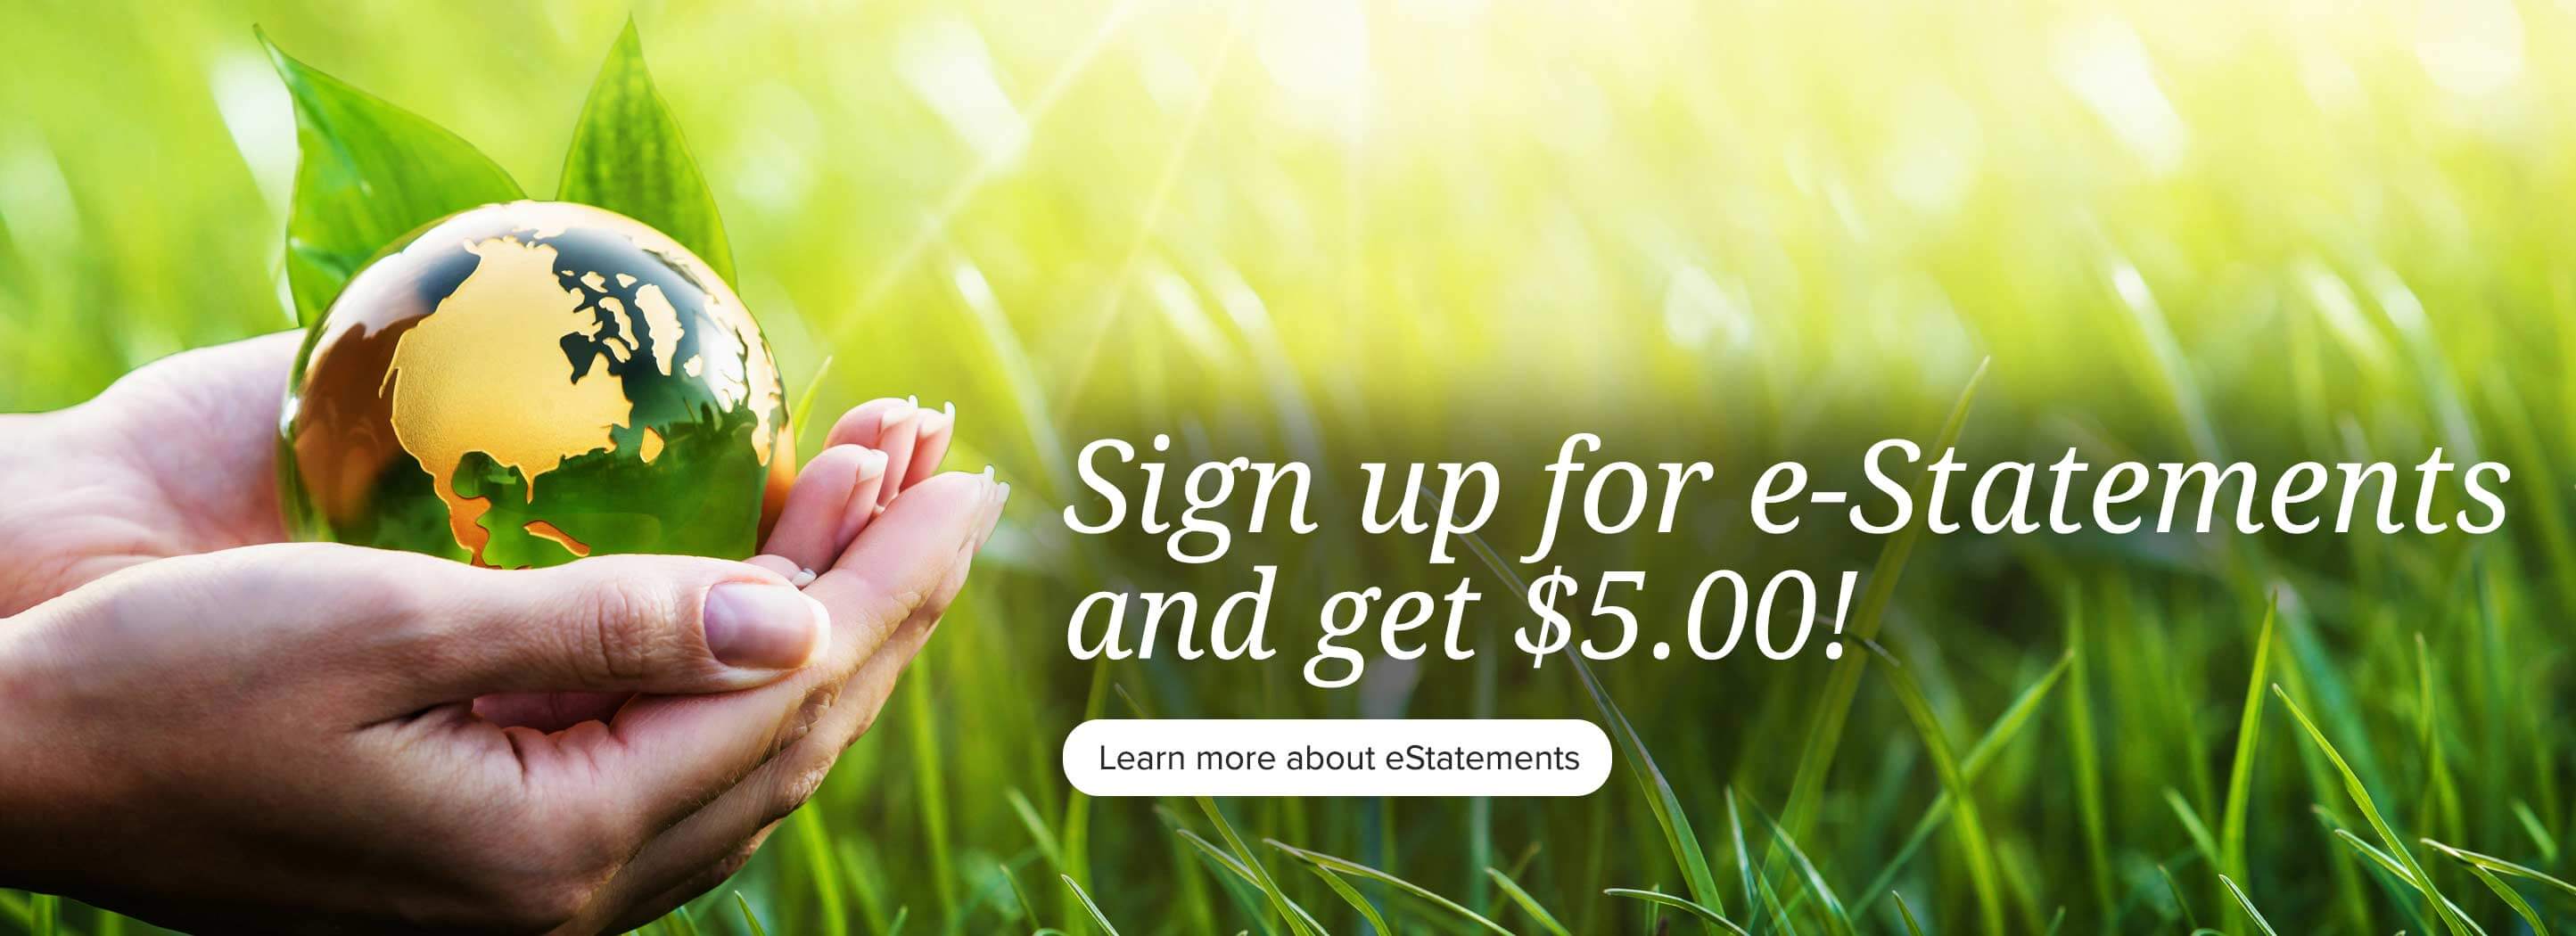 eStatements, View and Download! Learn more about eStatements